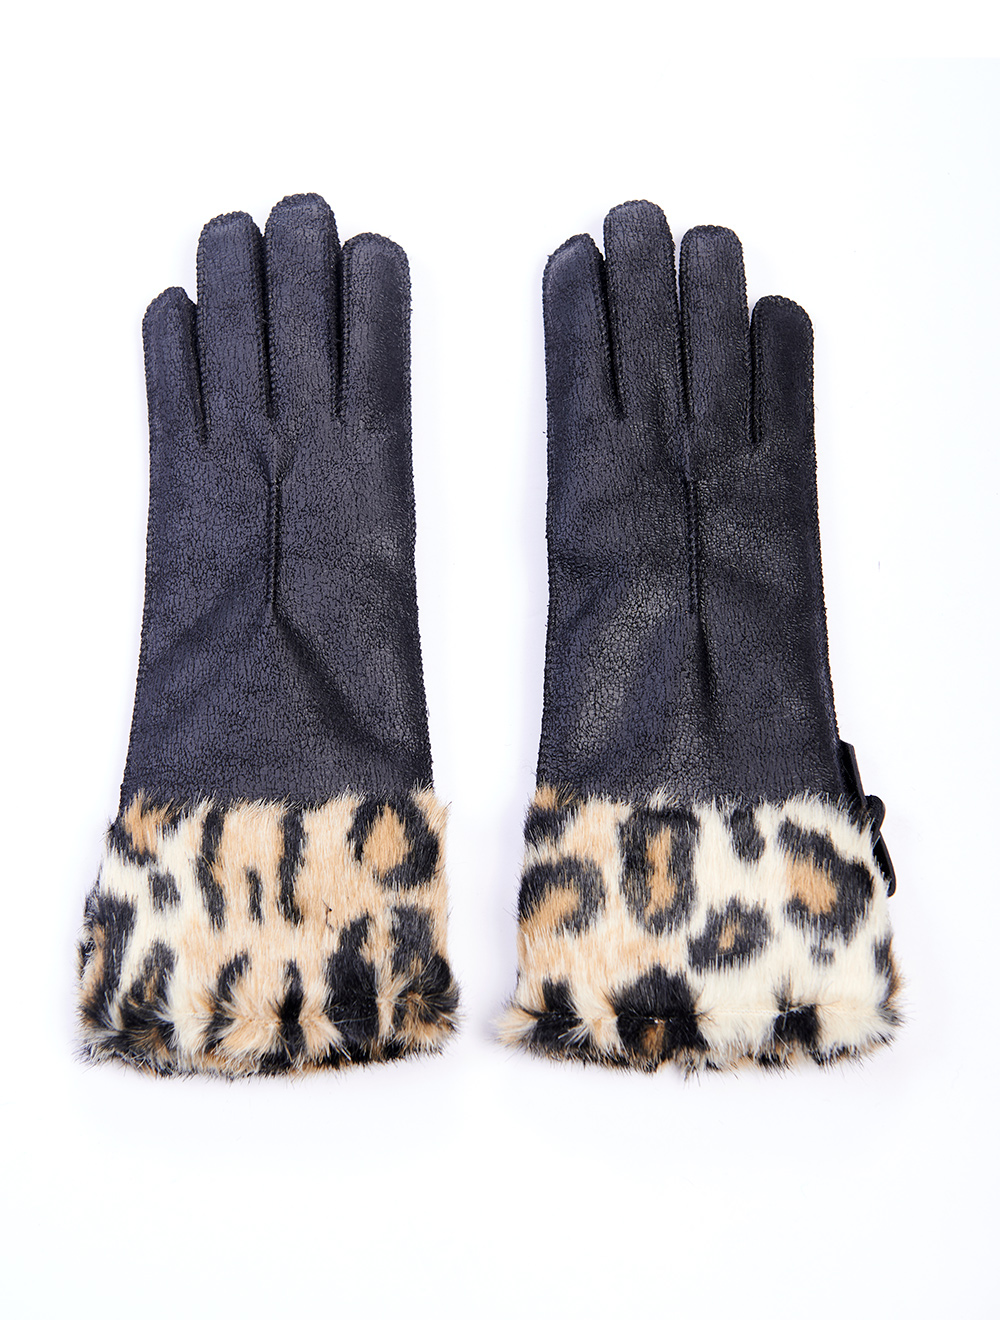 Gloves with cuffs in spotted faux fur - Save The Queen!